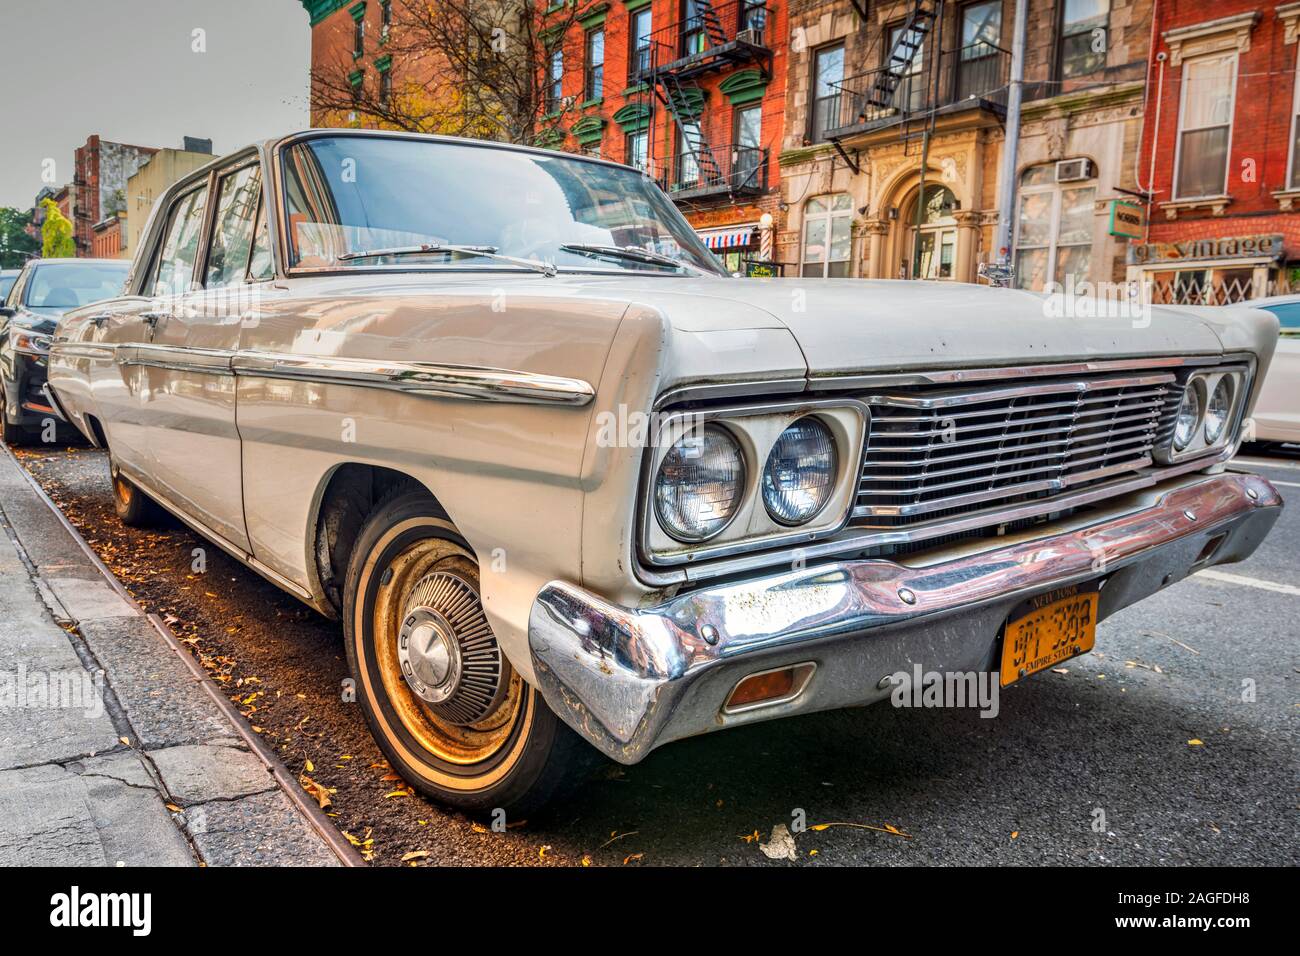 Old Ford Fairlane car parked, East Village, Manhattan, New York, USA Stock Photo